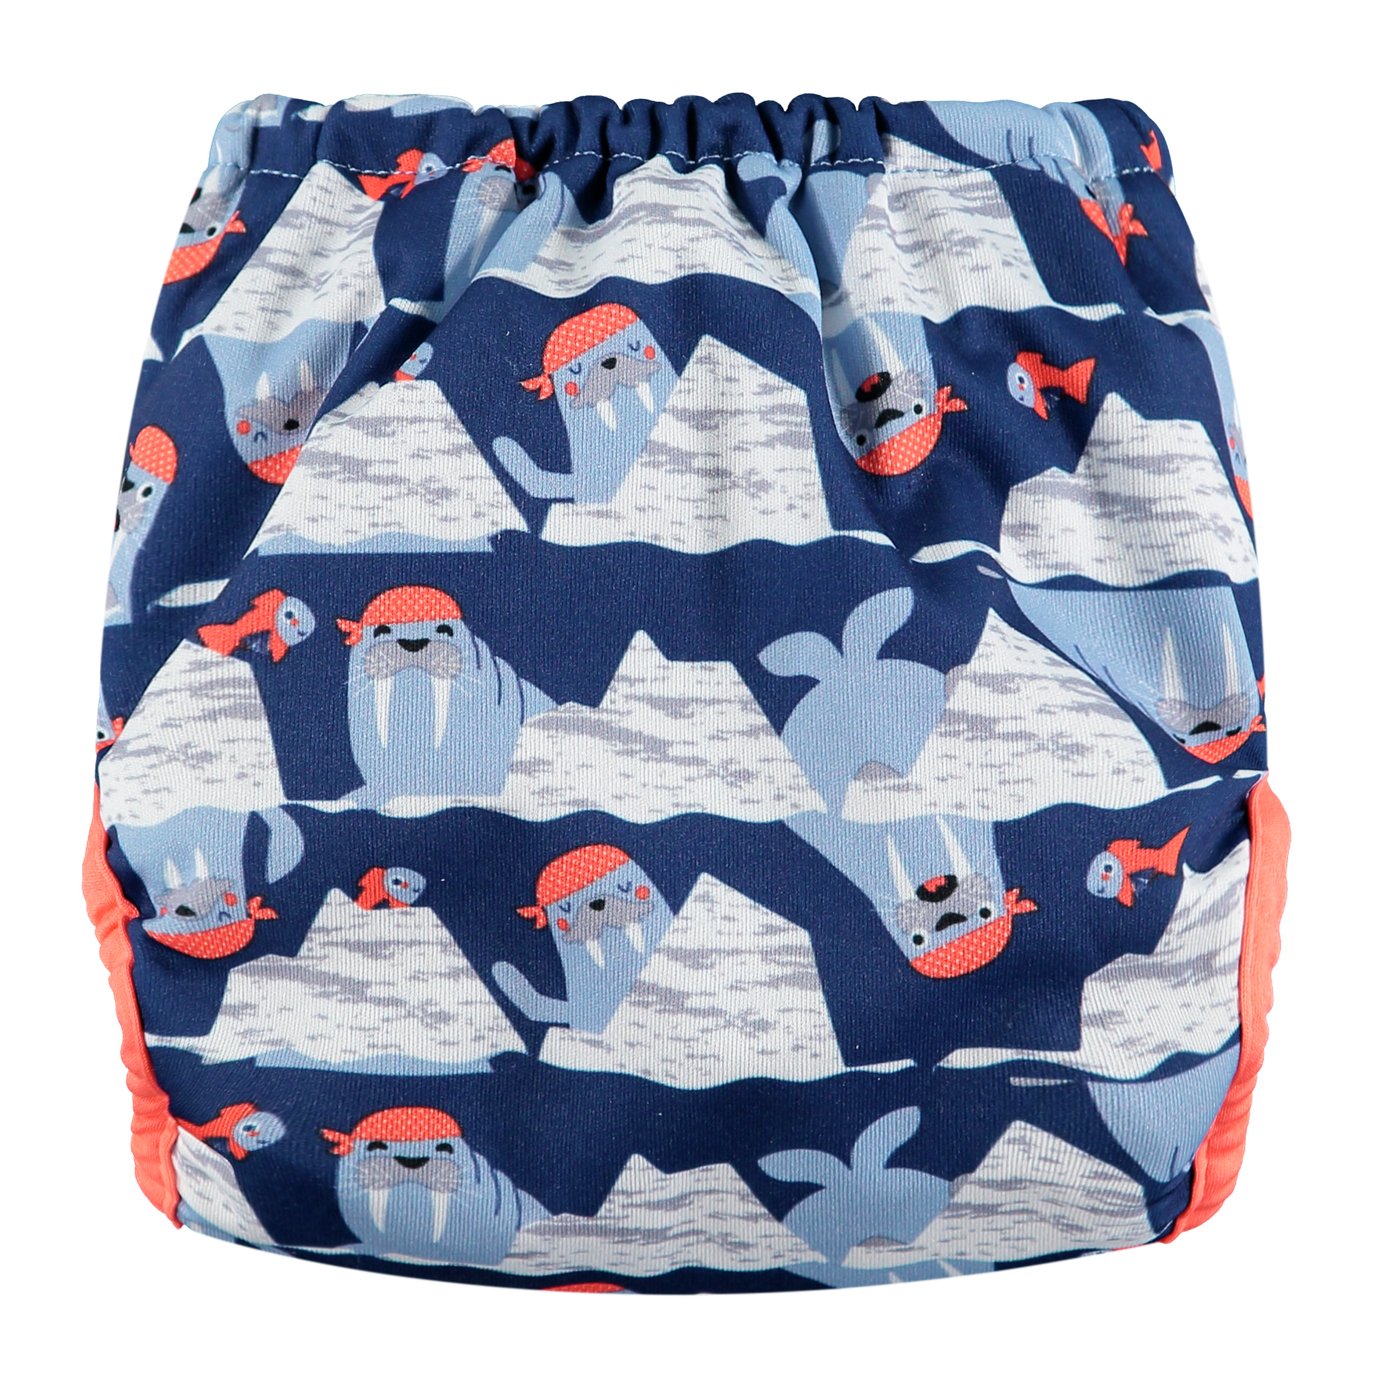 Pop-in Reusable Nappy Review